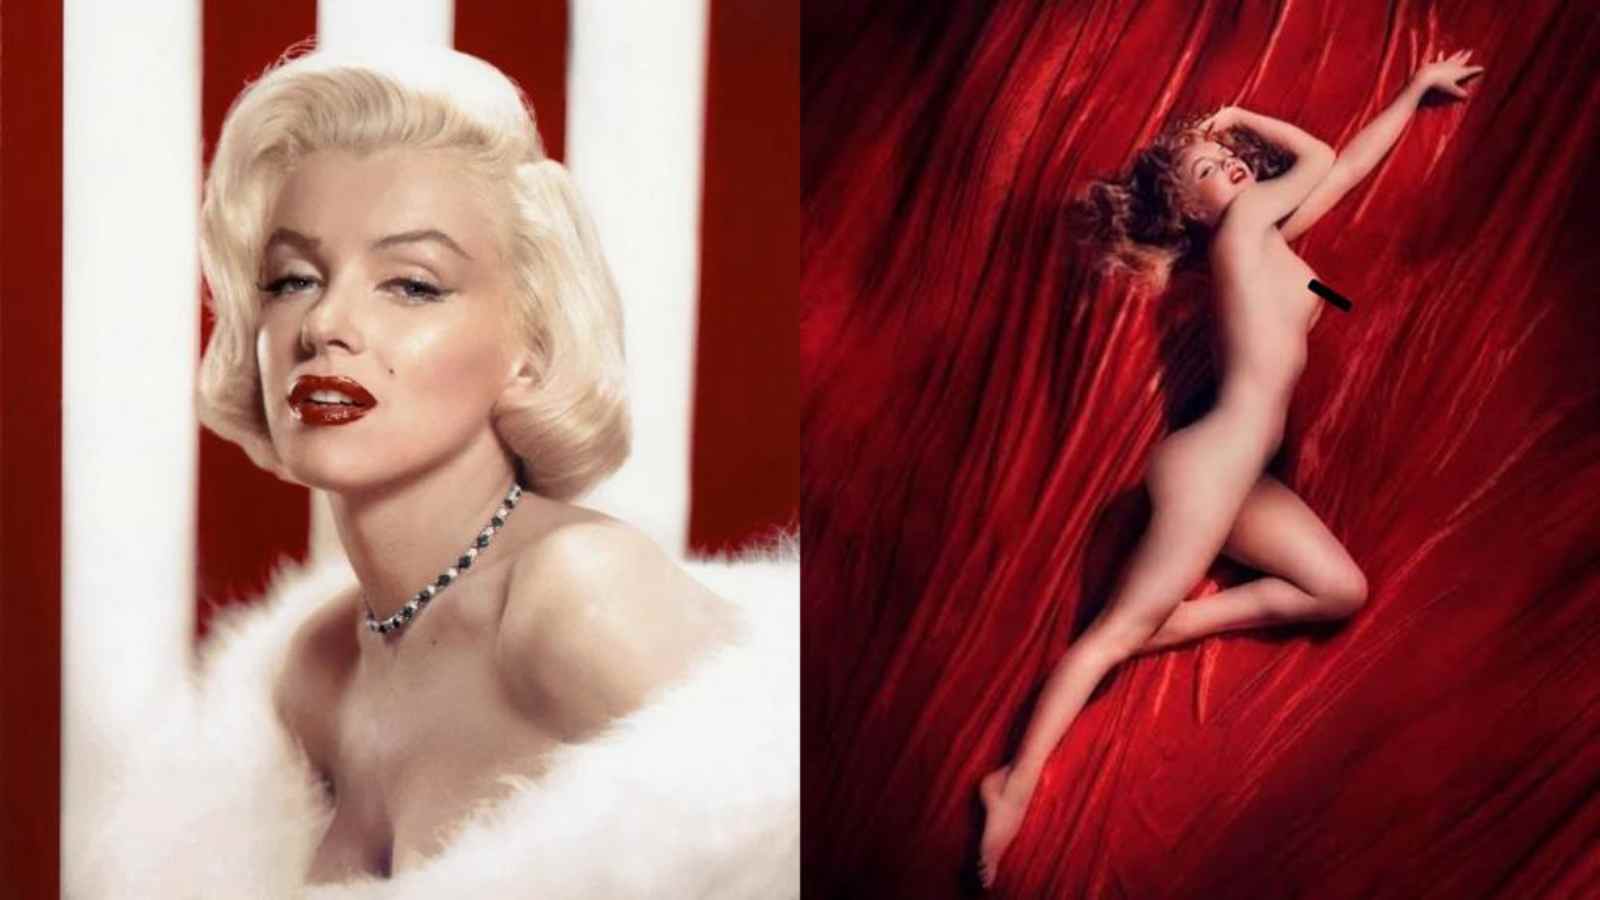 The truth behind the nude photoshoot of Marilyn Monroe for Playboy magazine